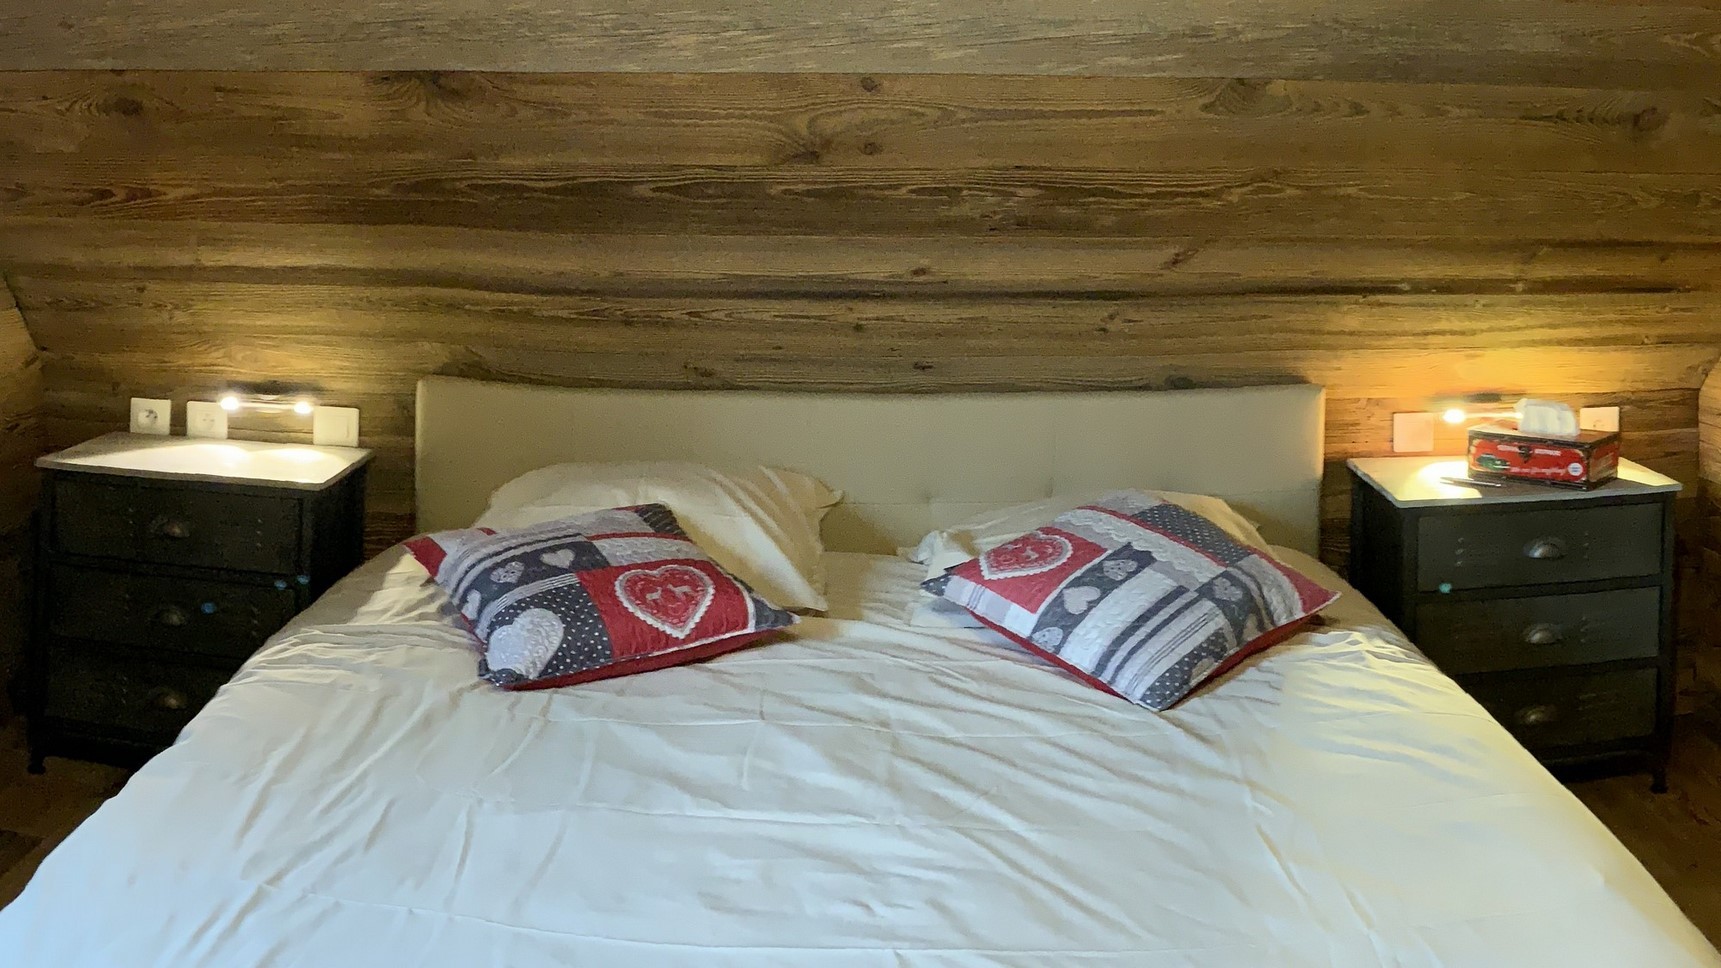 Chalet l'Anorak, Tyrolean bedroom, King Size bed and headboard